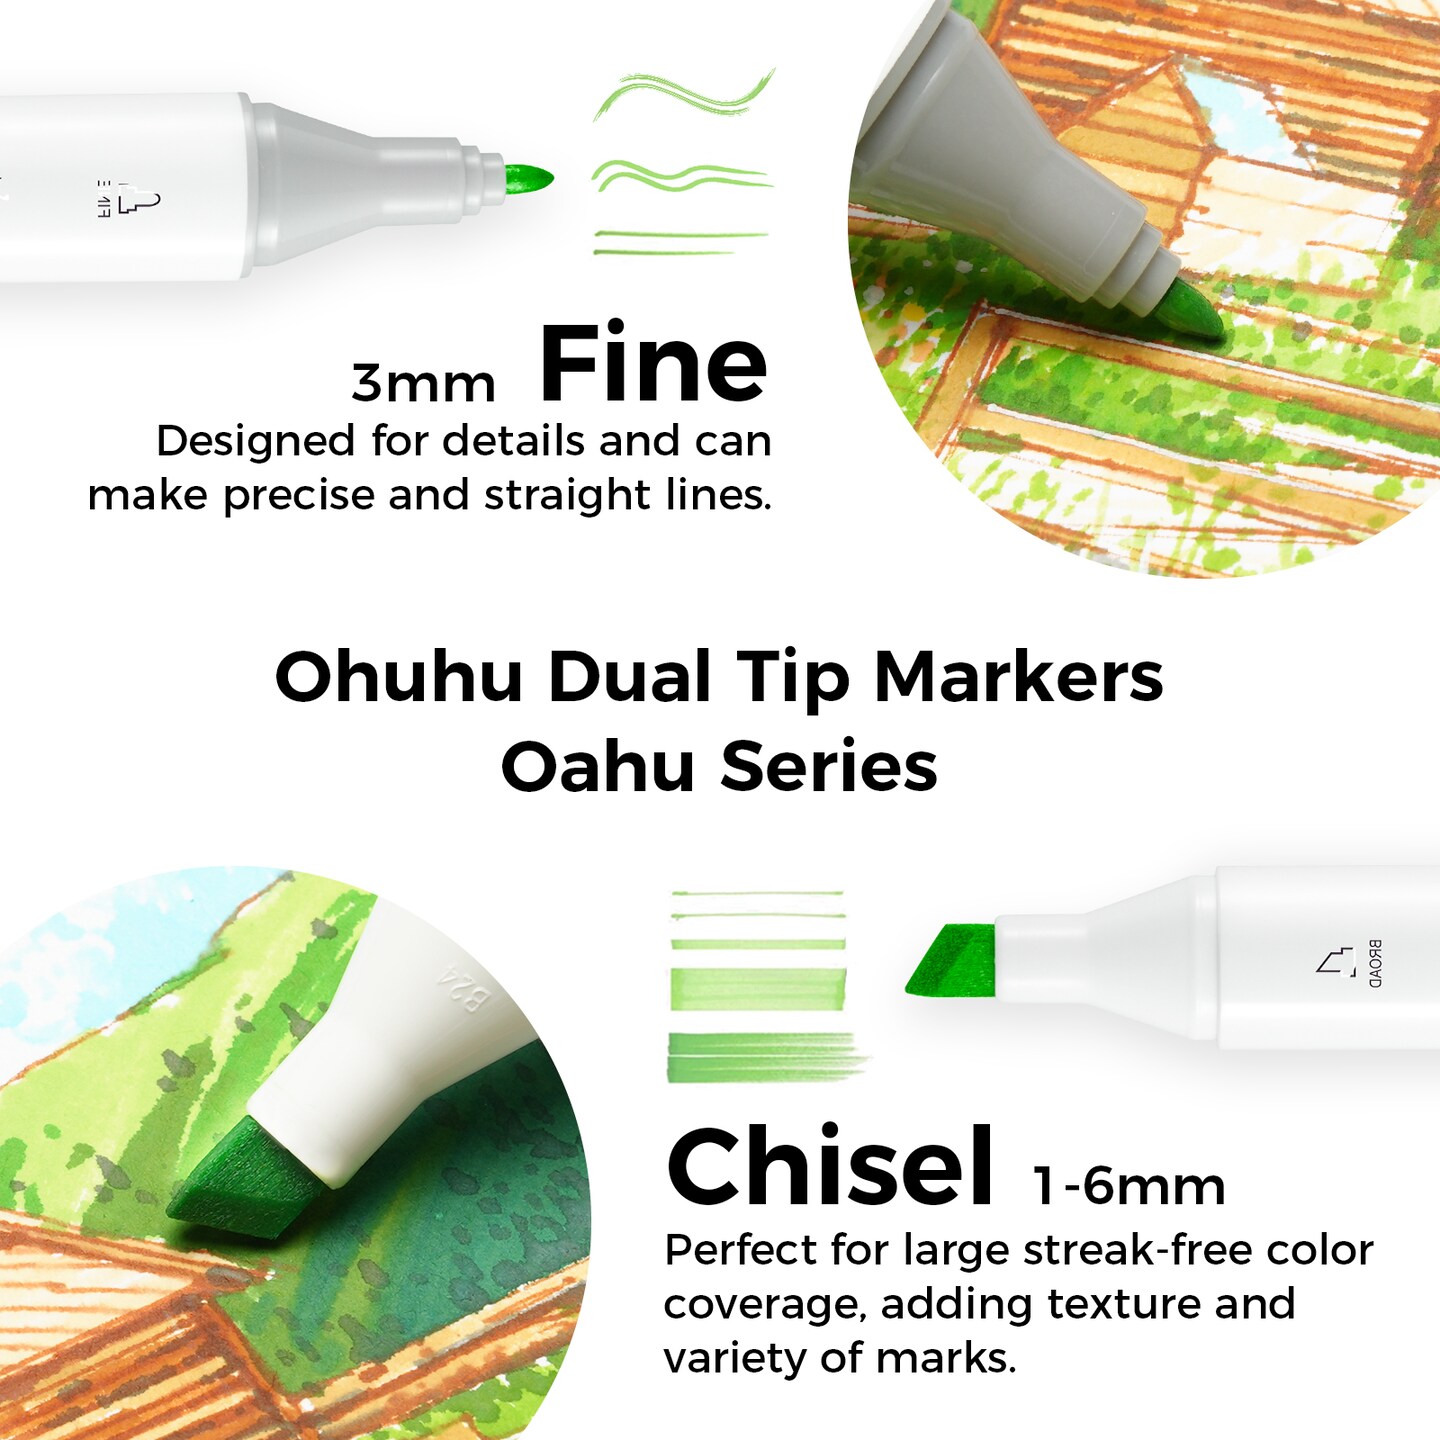 Ohuhu Oahu 40 Colors Markers, Chisel and Fine Tip Markers, Alcohol Markers, Sketch Markers for Coloring Book Sketch Illustration